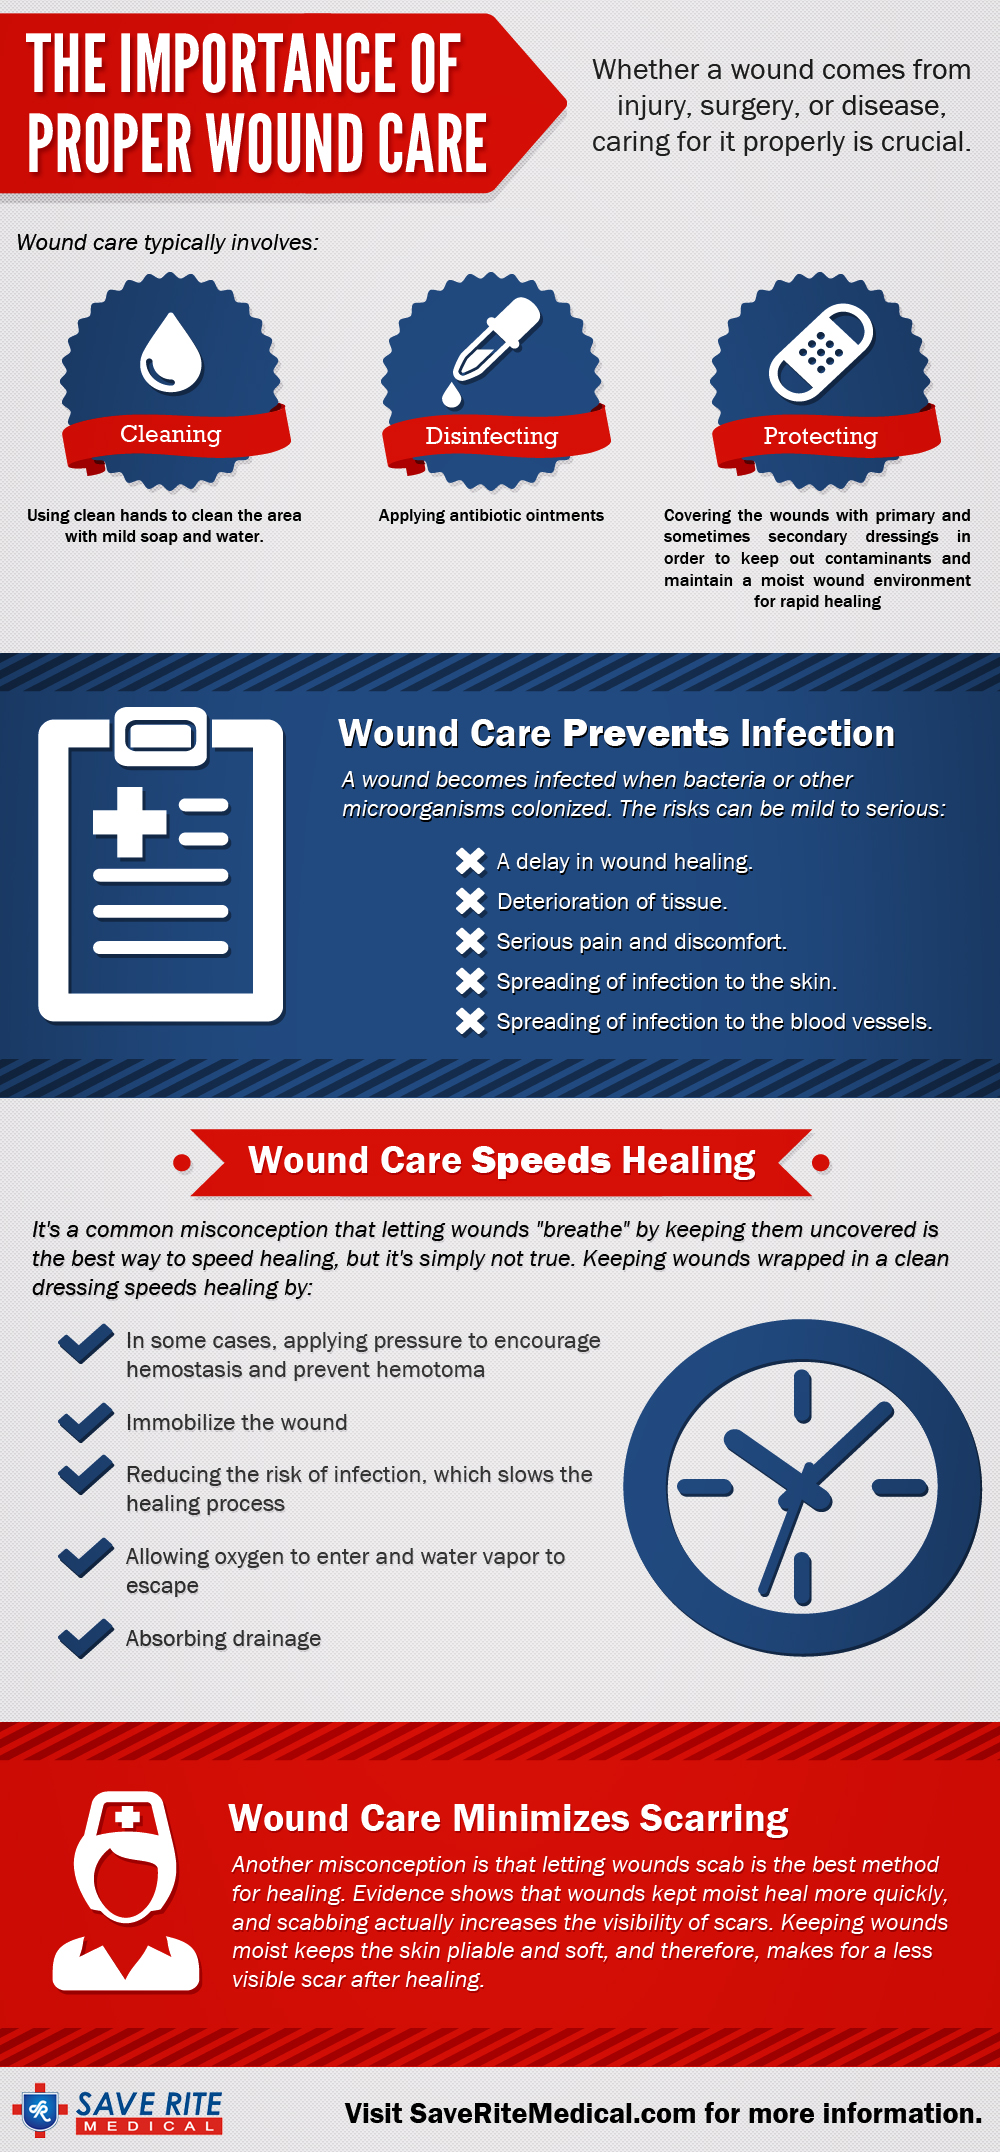 The Importance of Proper Wound Care